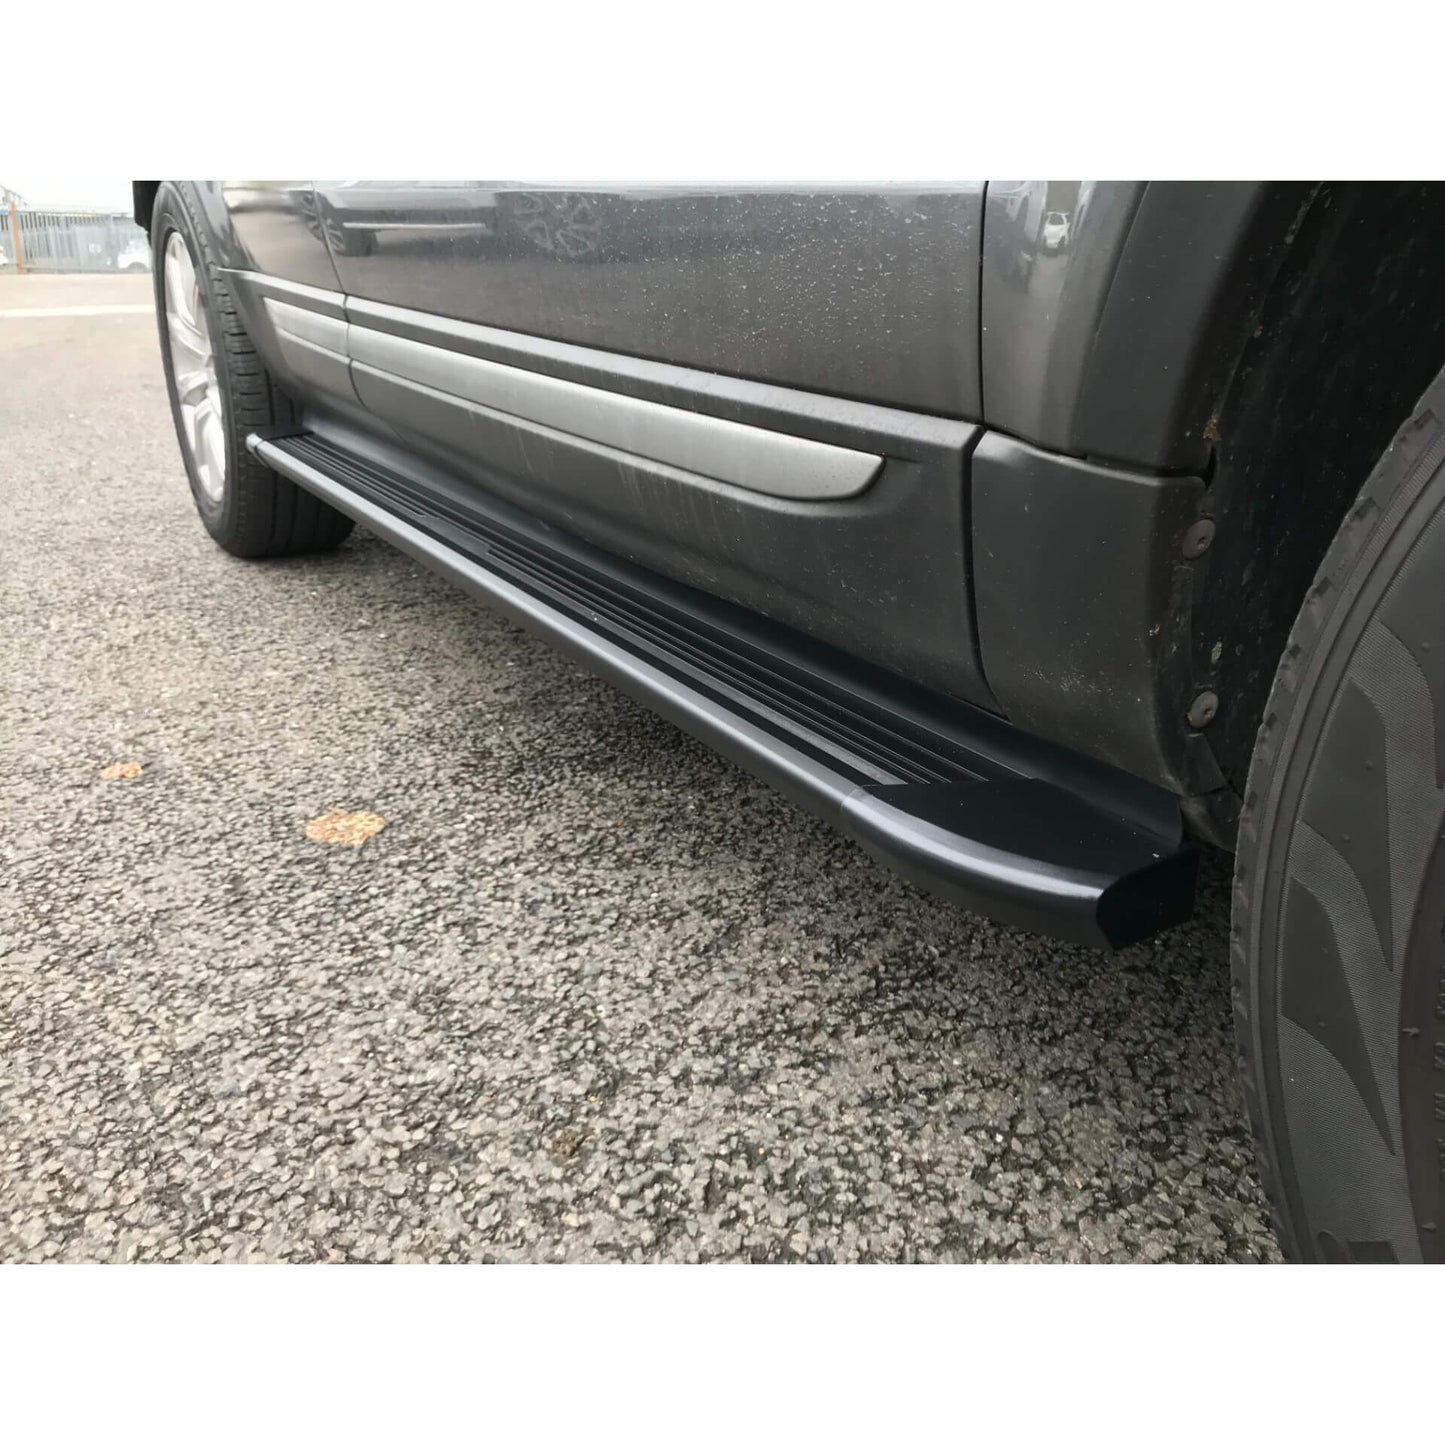 Puma Side Steps Running Boards for Range Rover Evoque Pure and Prestige 2011-2018 -  - sold by Direct4x4